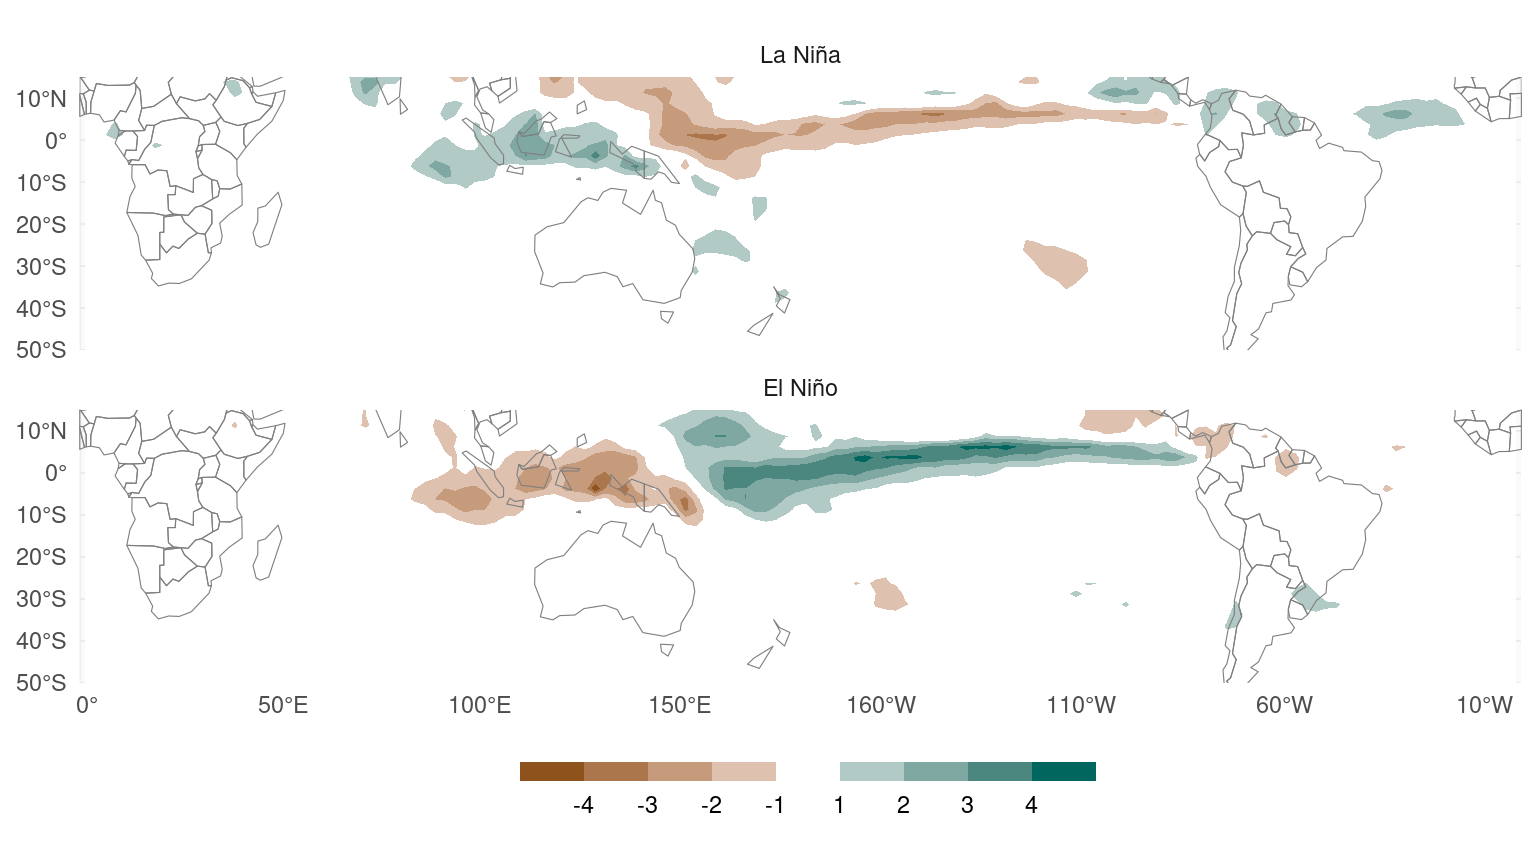 Maps of the Southern Hemisphere (10ºN to 50ºS) with filled contours. The top panel, labelled “La Niña”, has a band of negative values along the equatorial Pacific and positive values over Papua New Guinea and Indonesia. The bottom panel, labelled “El Niño”, has a similar pattern but with the sign reversed and somewhat larger values.